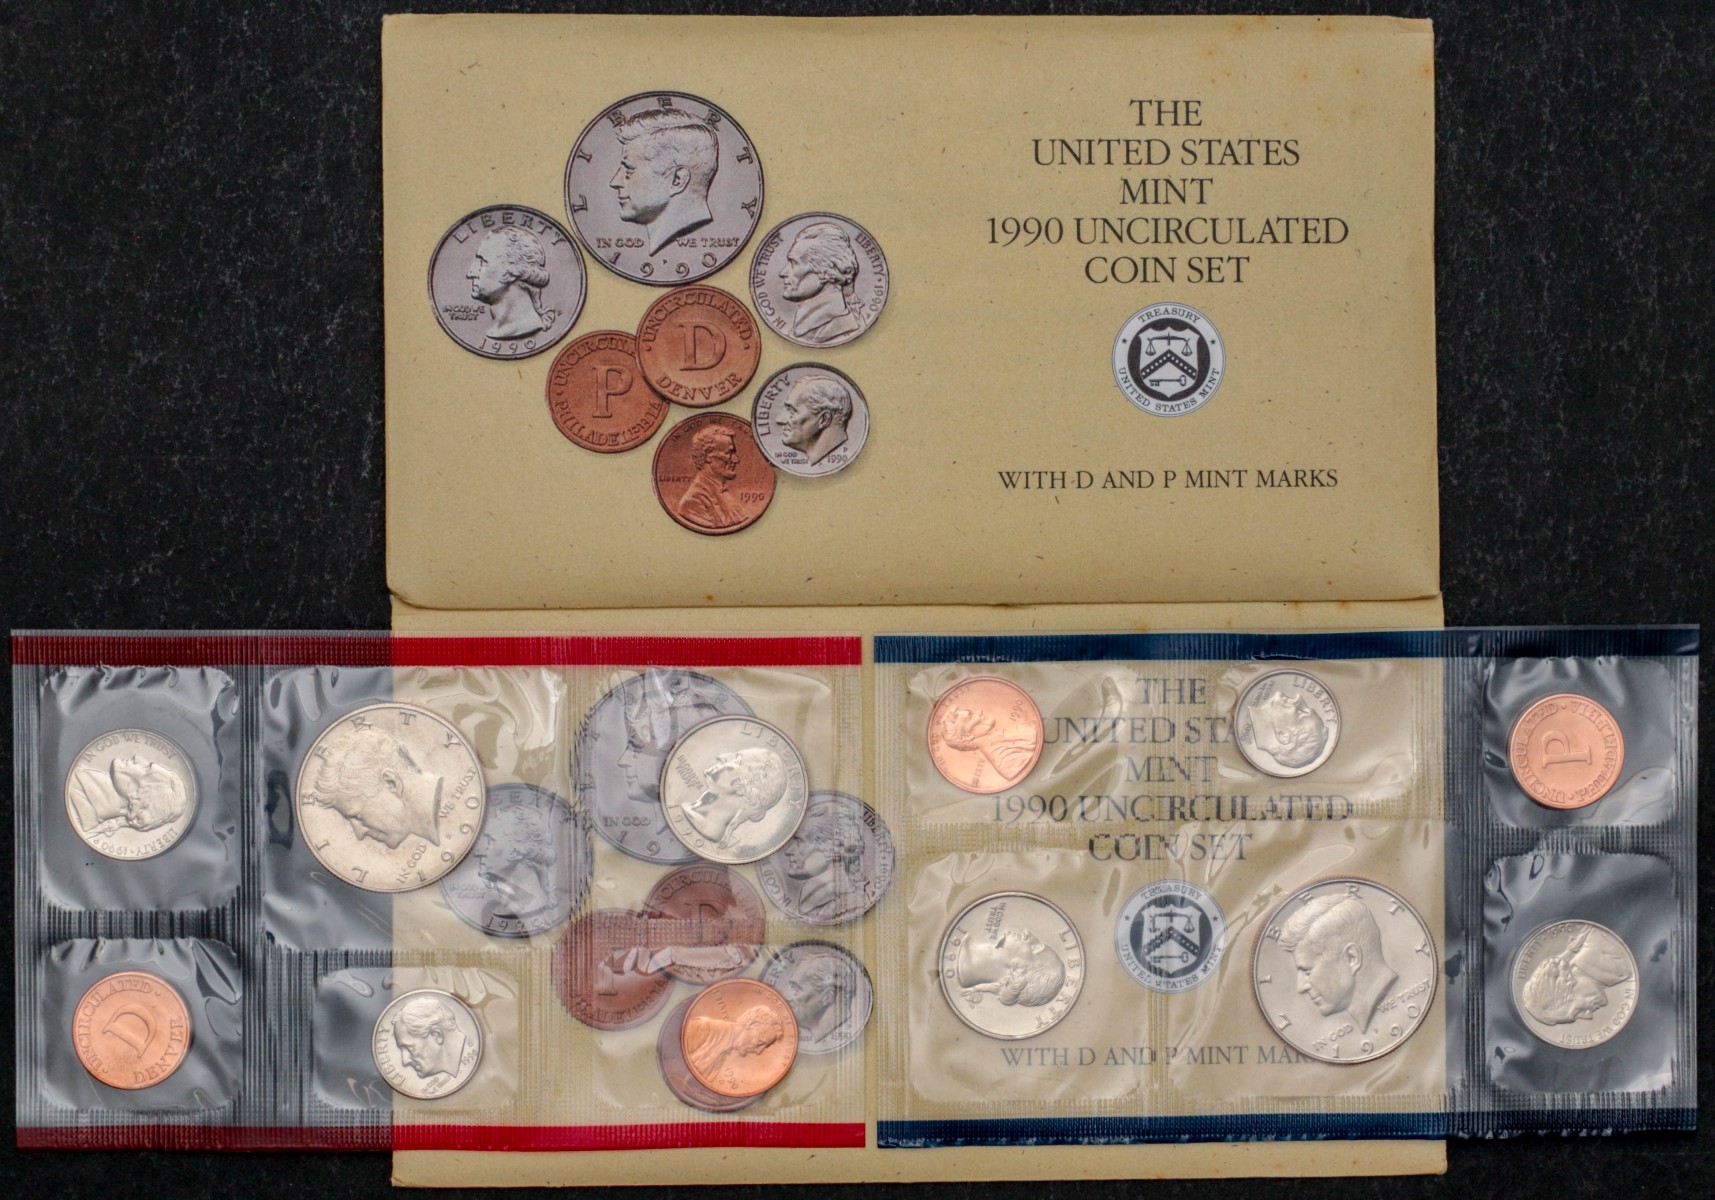 PROOF SETS FOR 1986, 1991, 1990 WITH MAILERS